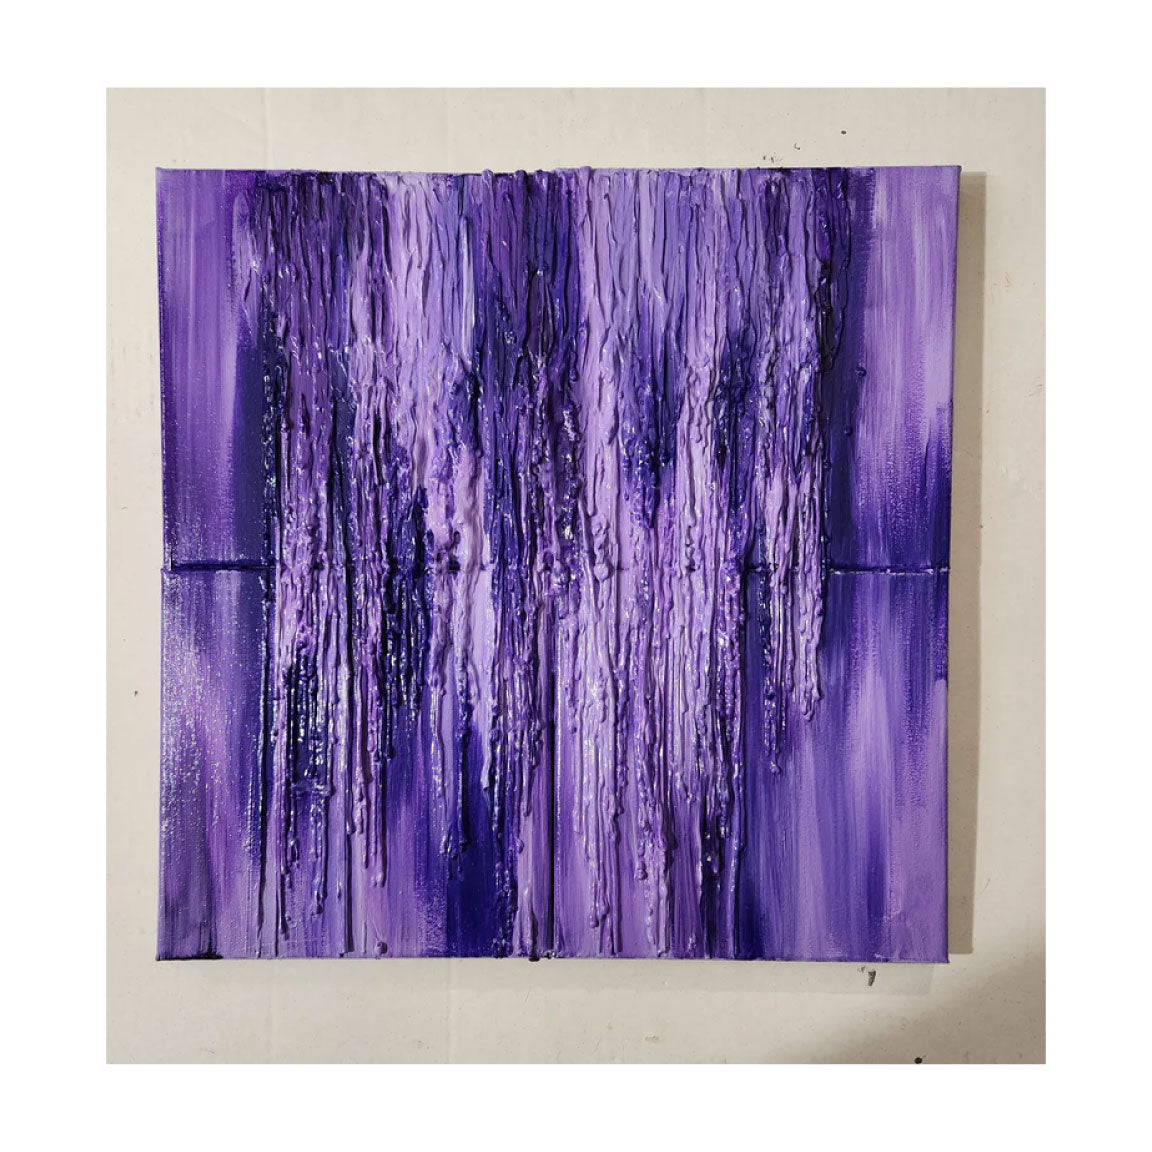 'PURPLES MELTING' Acrylic, Crayon, and Mixed Media on Canvas